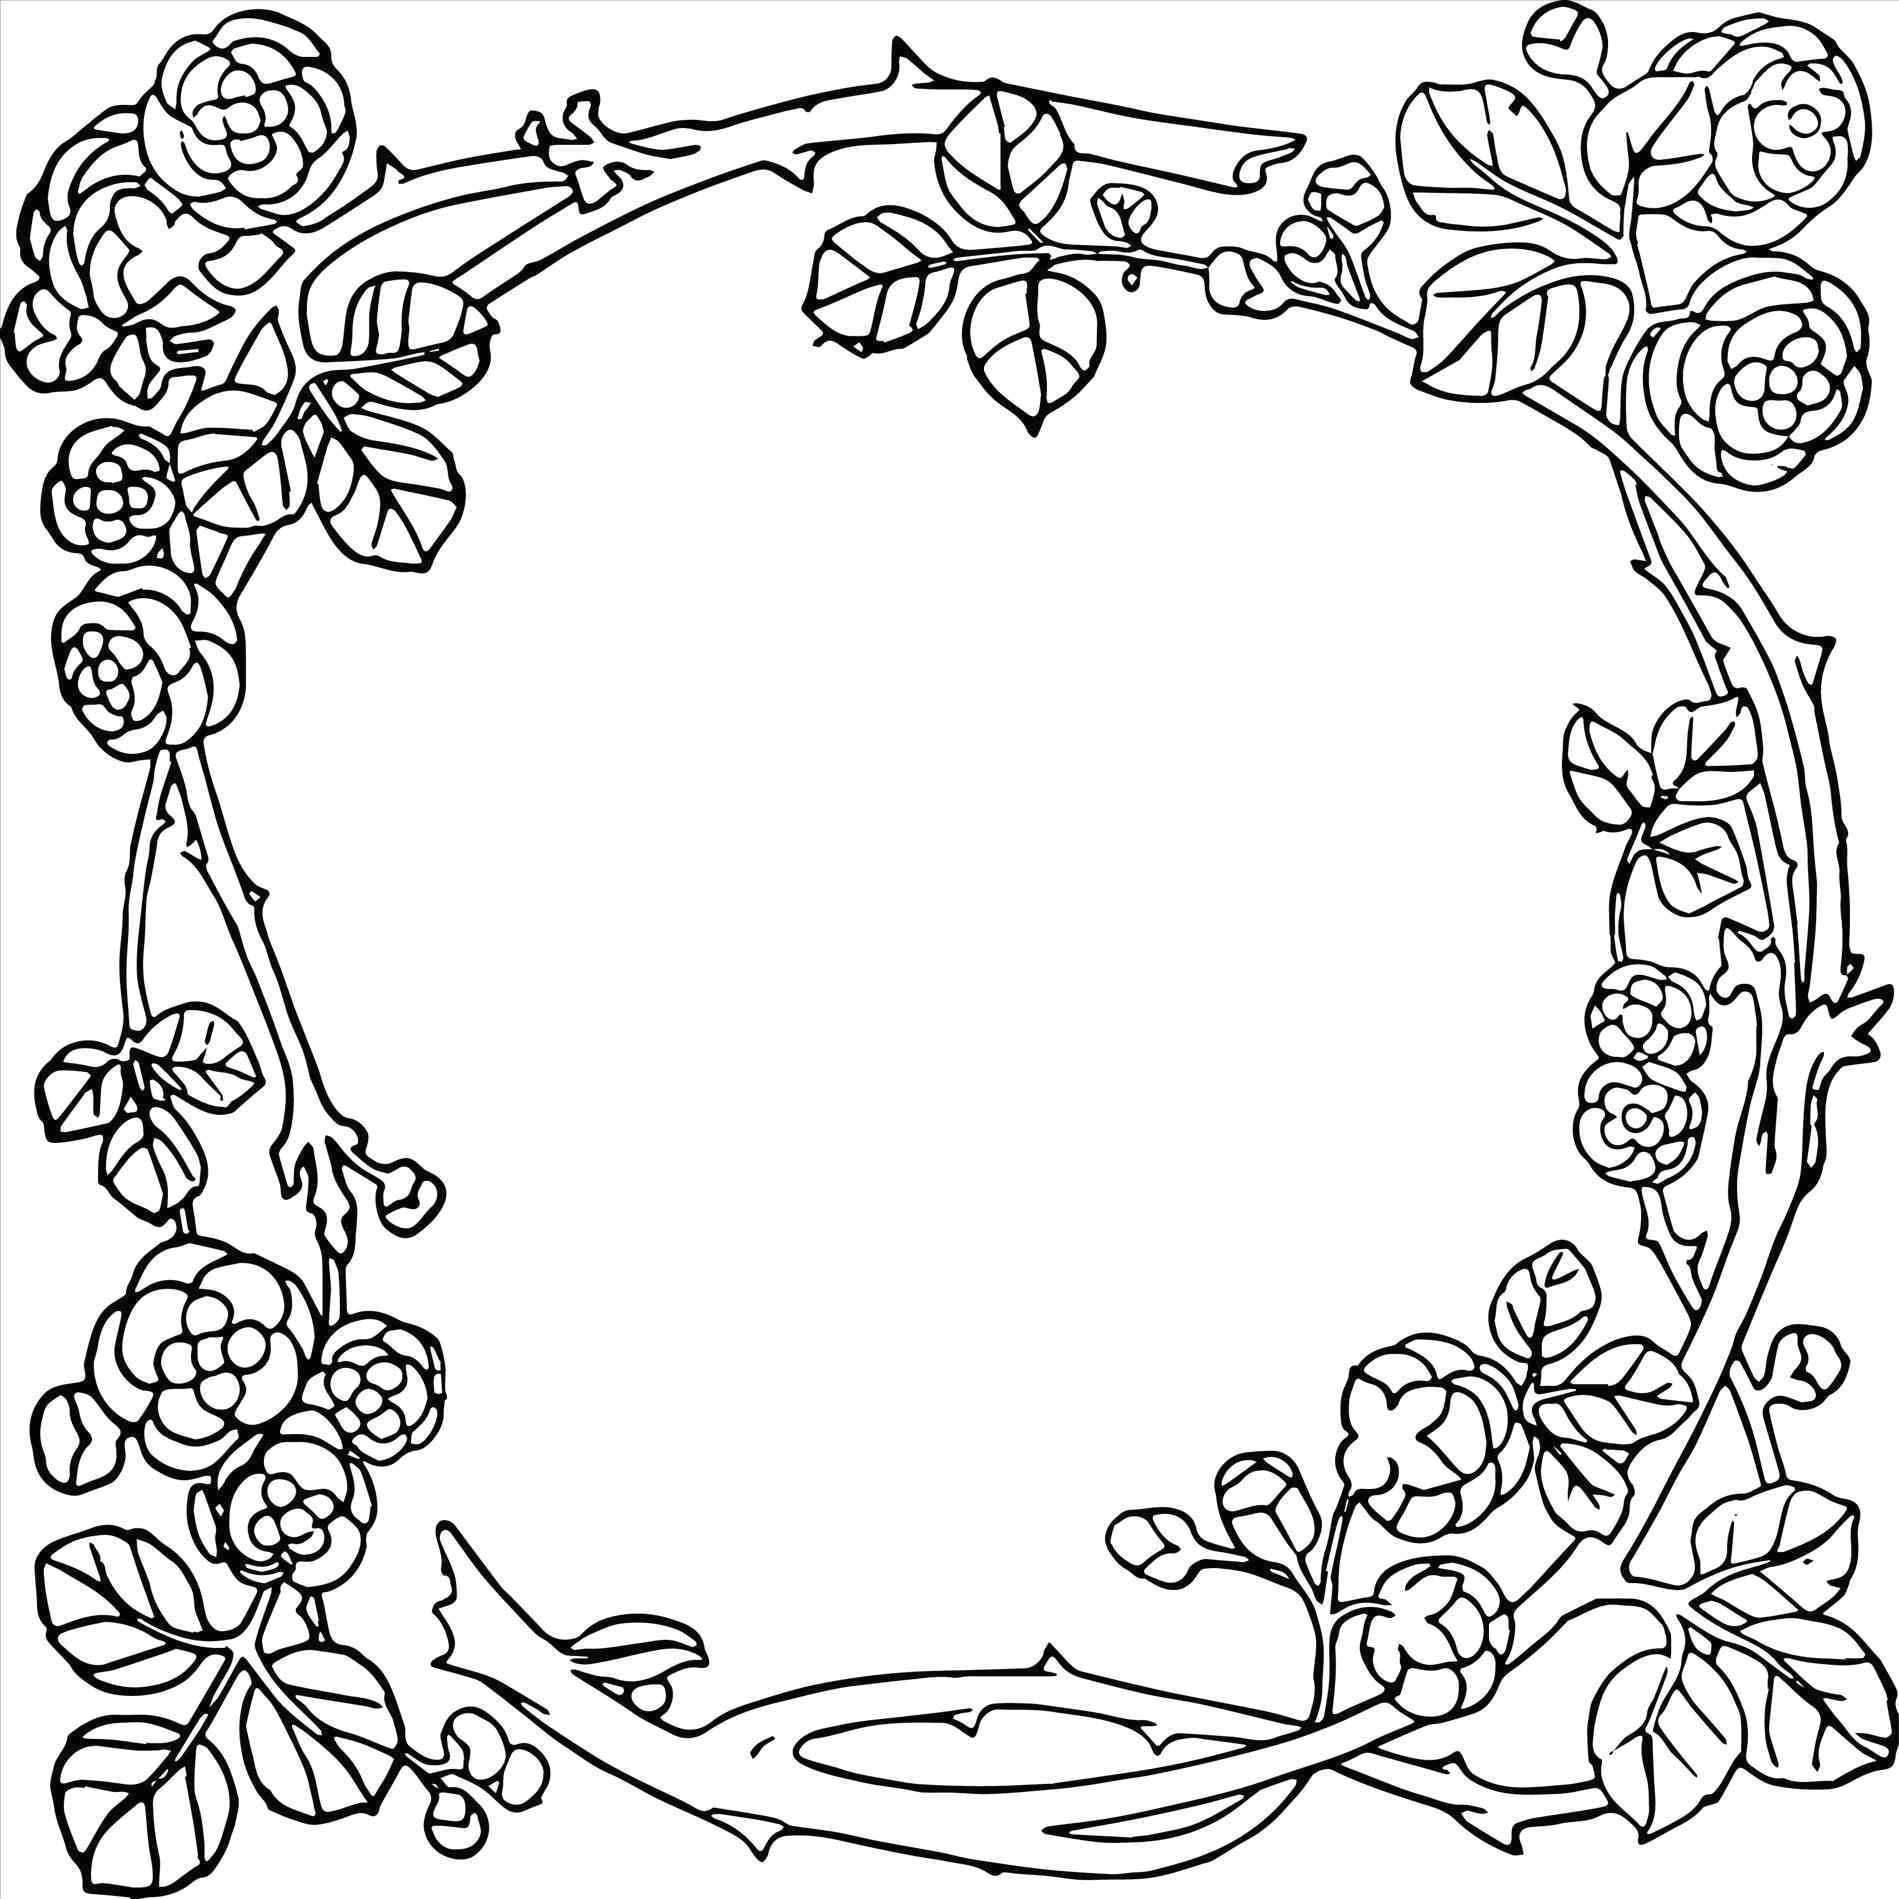 cute borders frames youtube border designs for drawing sketch picture border border designs to draw designs